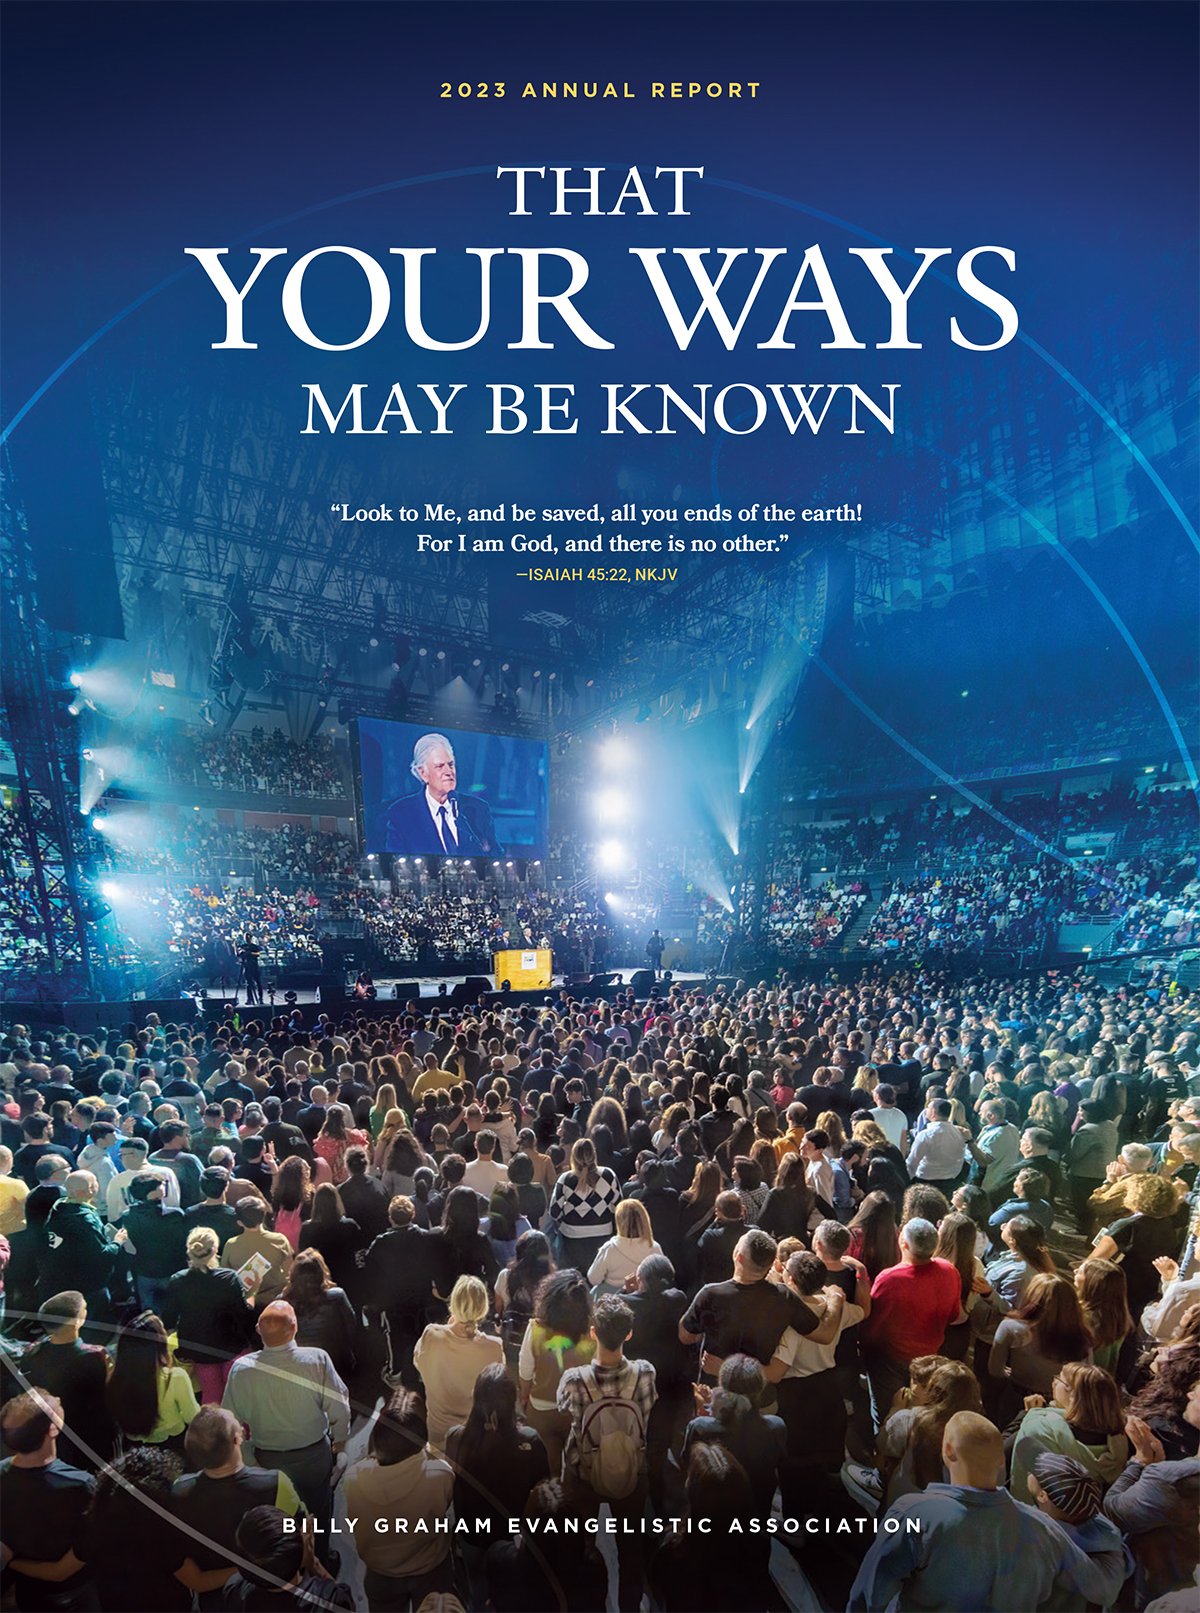 That YOUR WAYS May Be KNOWN, 2023 Annual Report